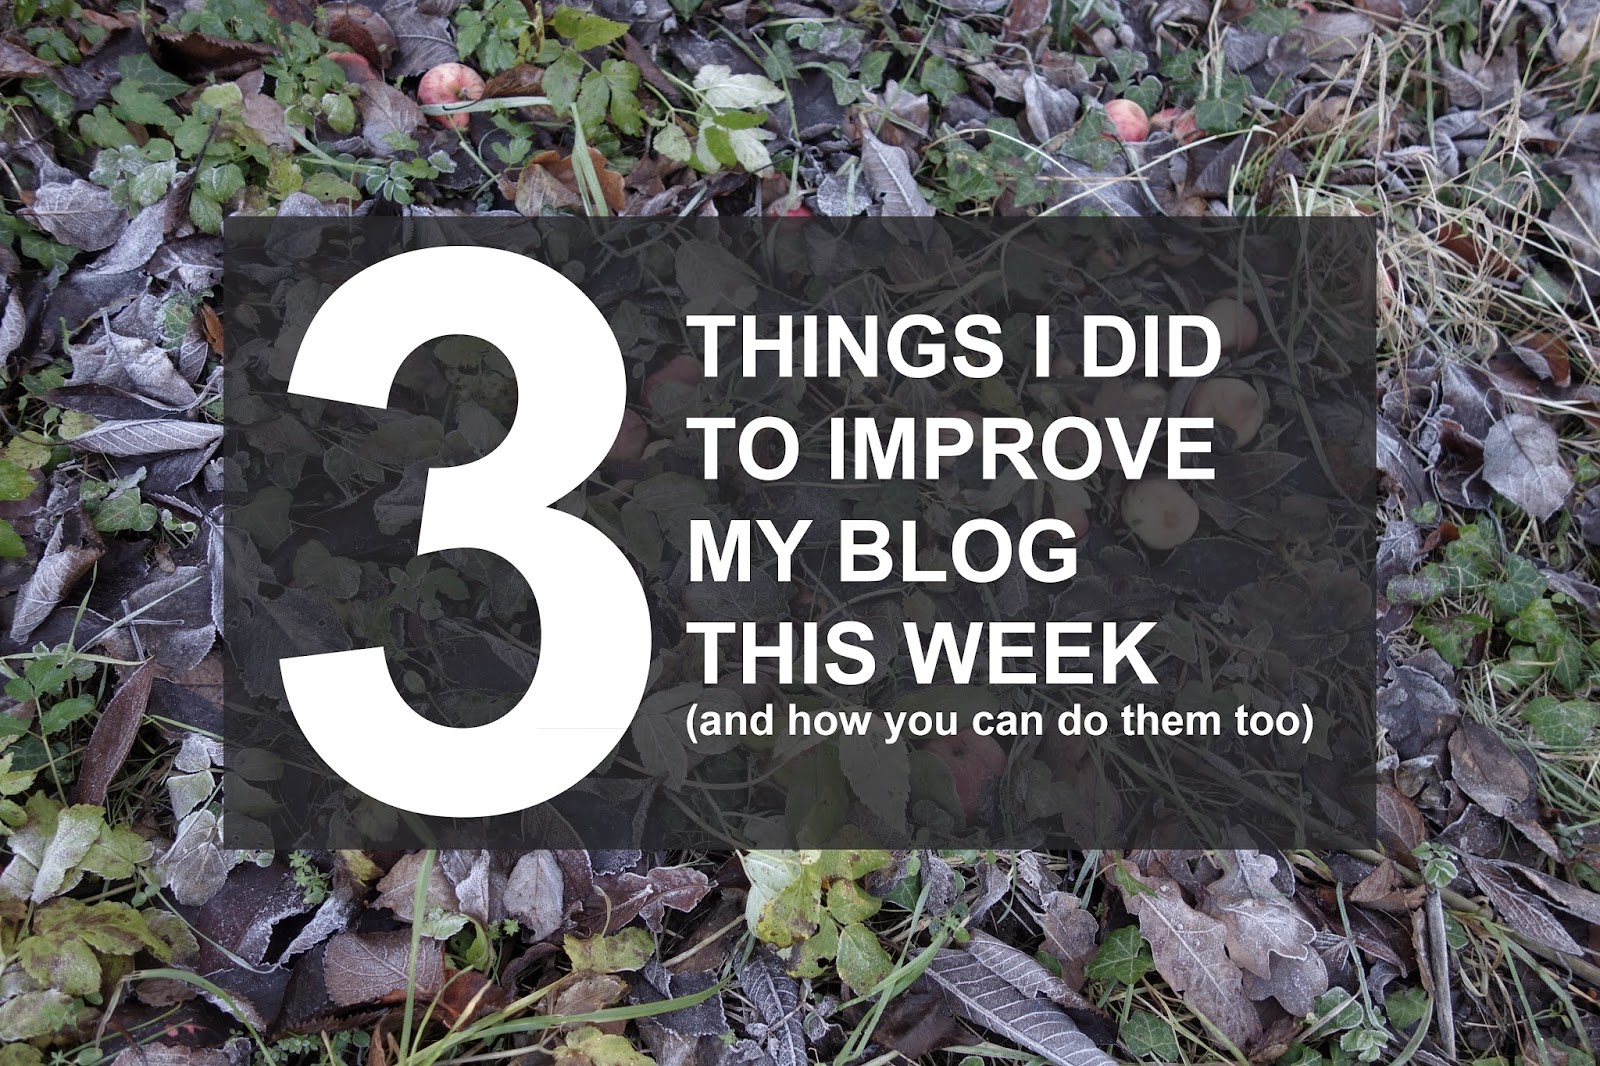 3 things I did to improve my blog this week (and how you can do them too!)